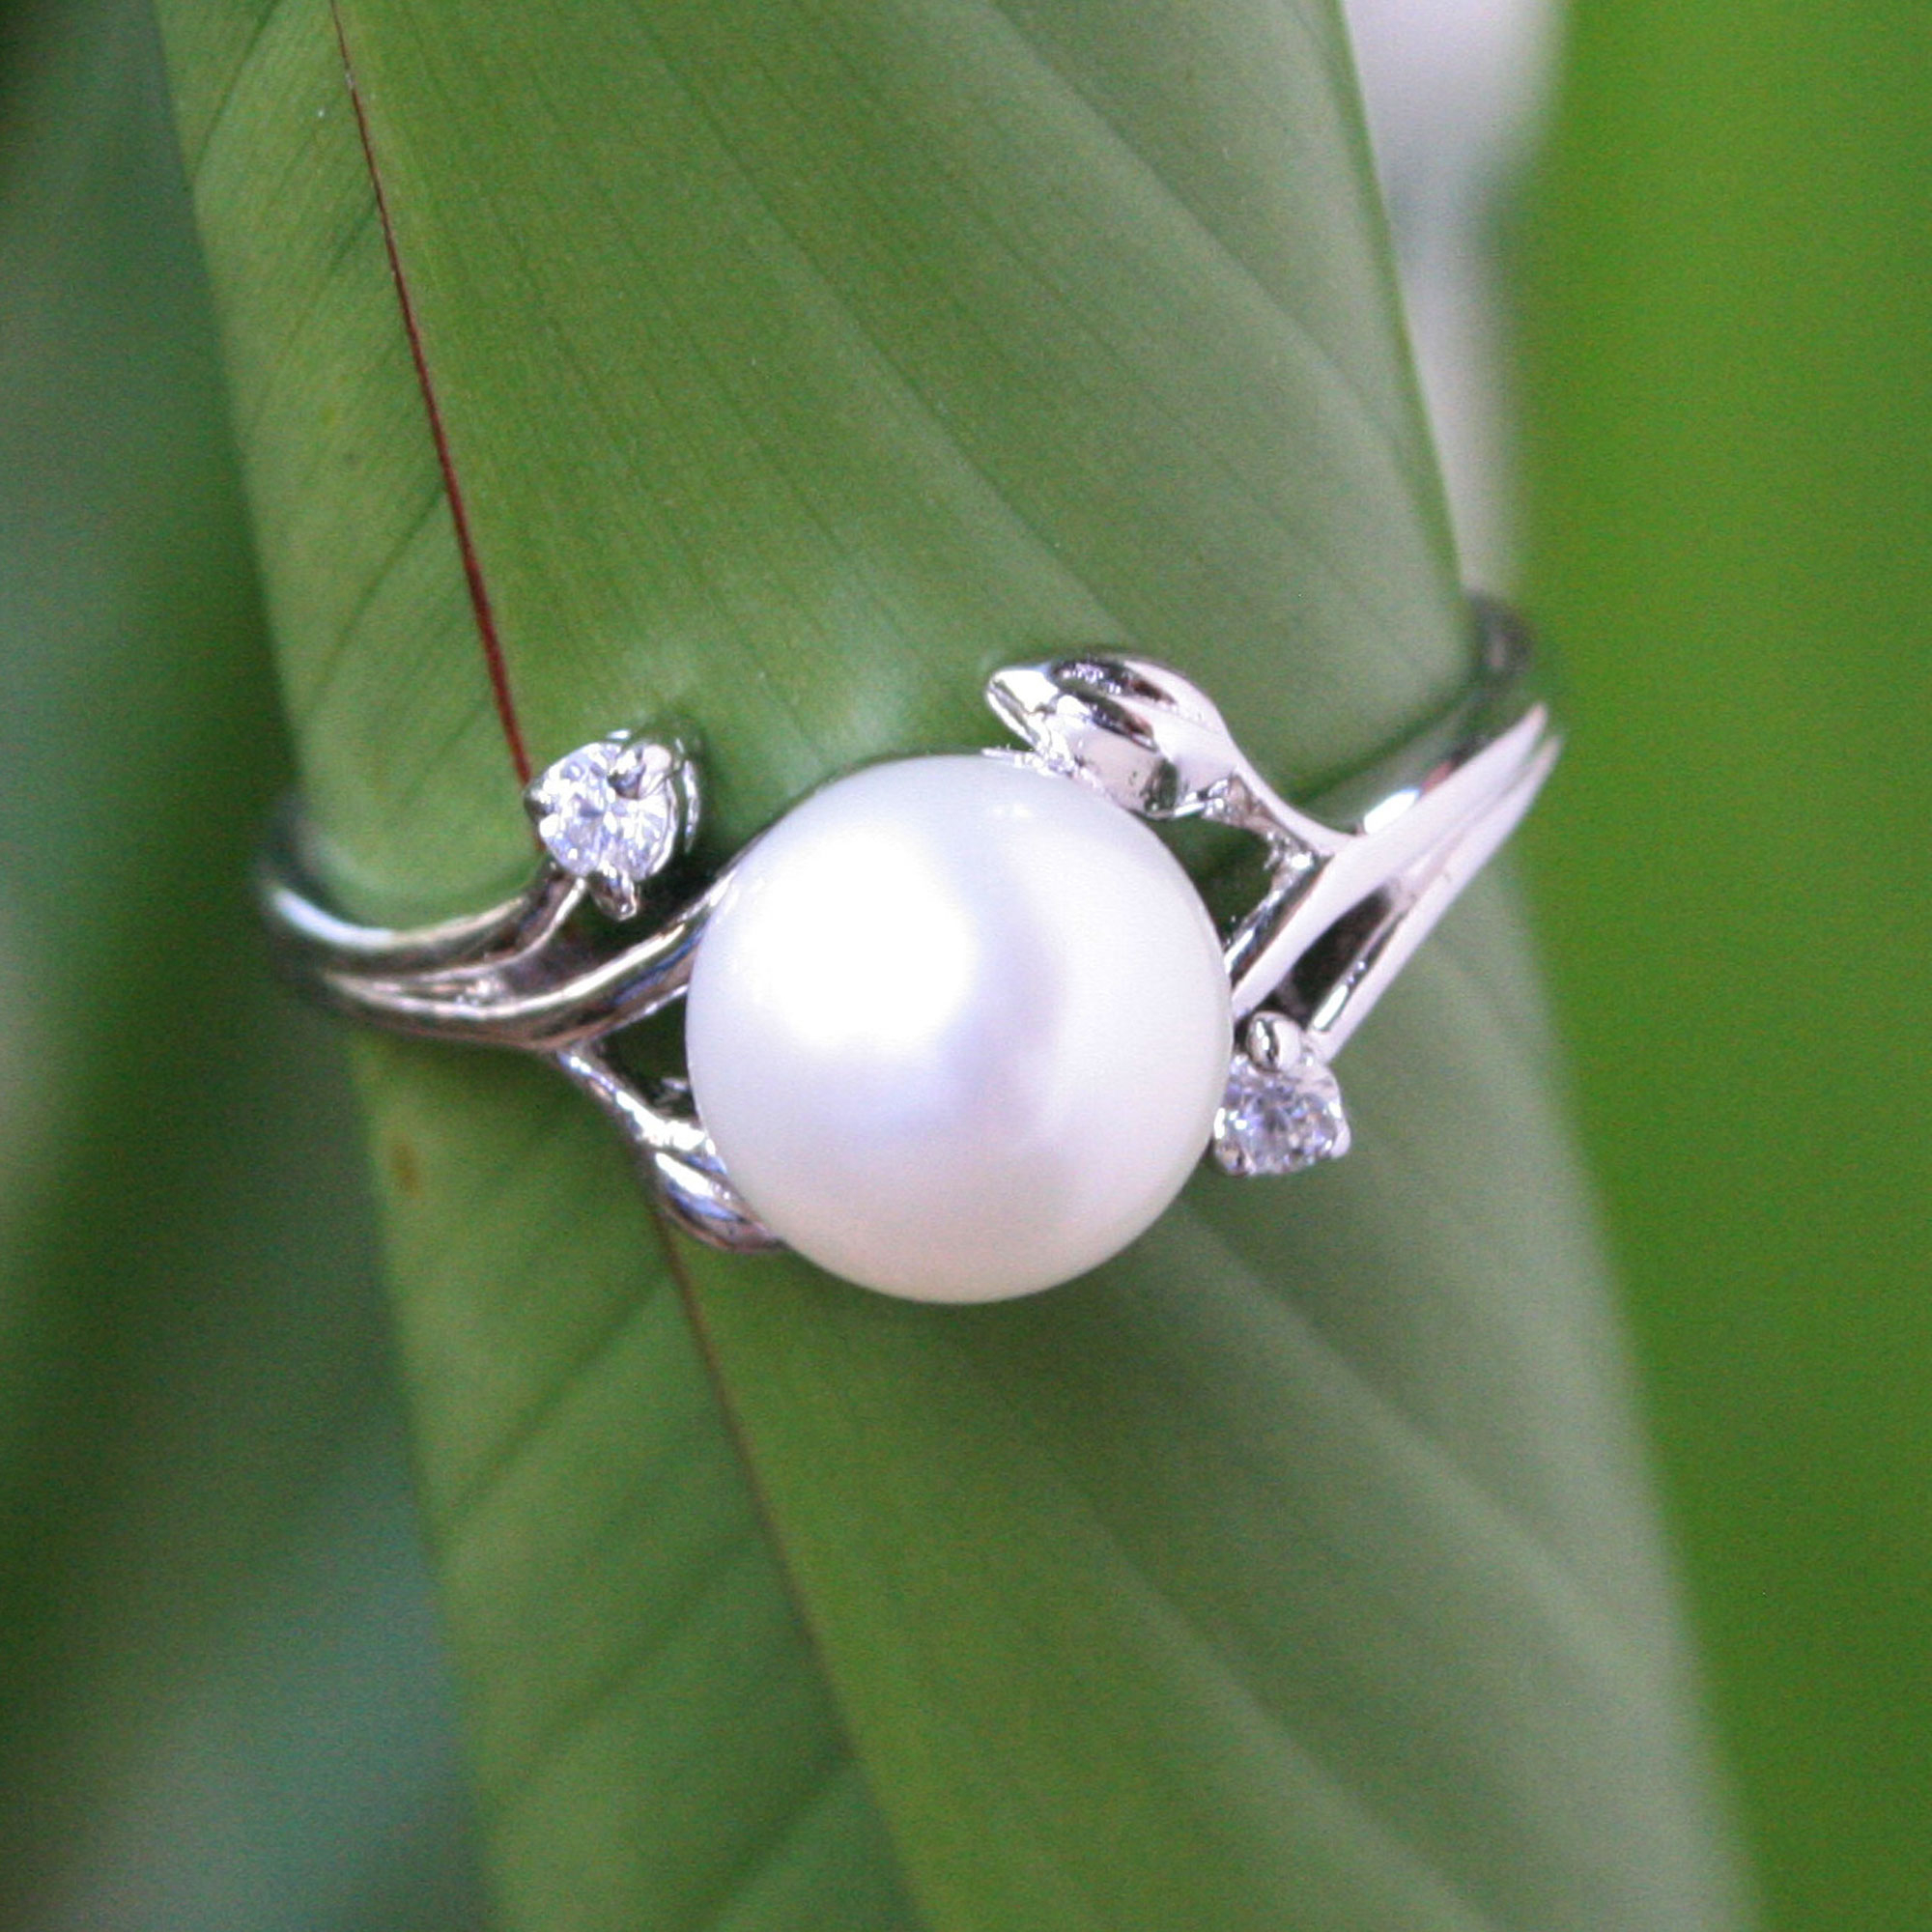 Benefits of Wearing Pearl as Per Astrology